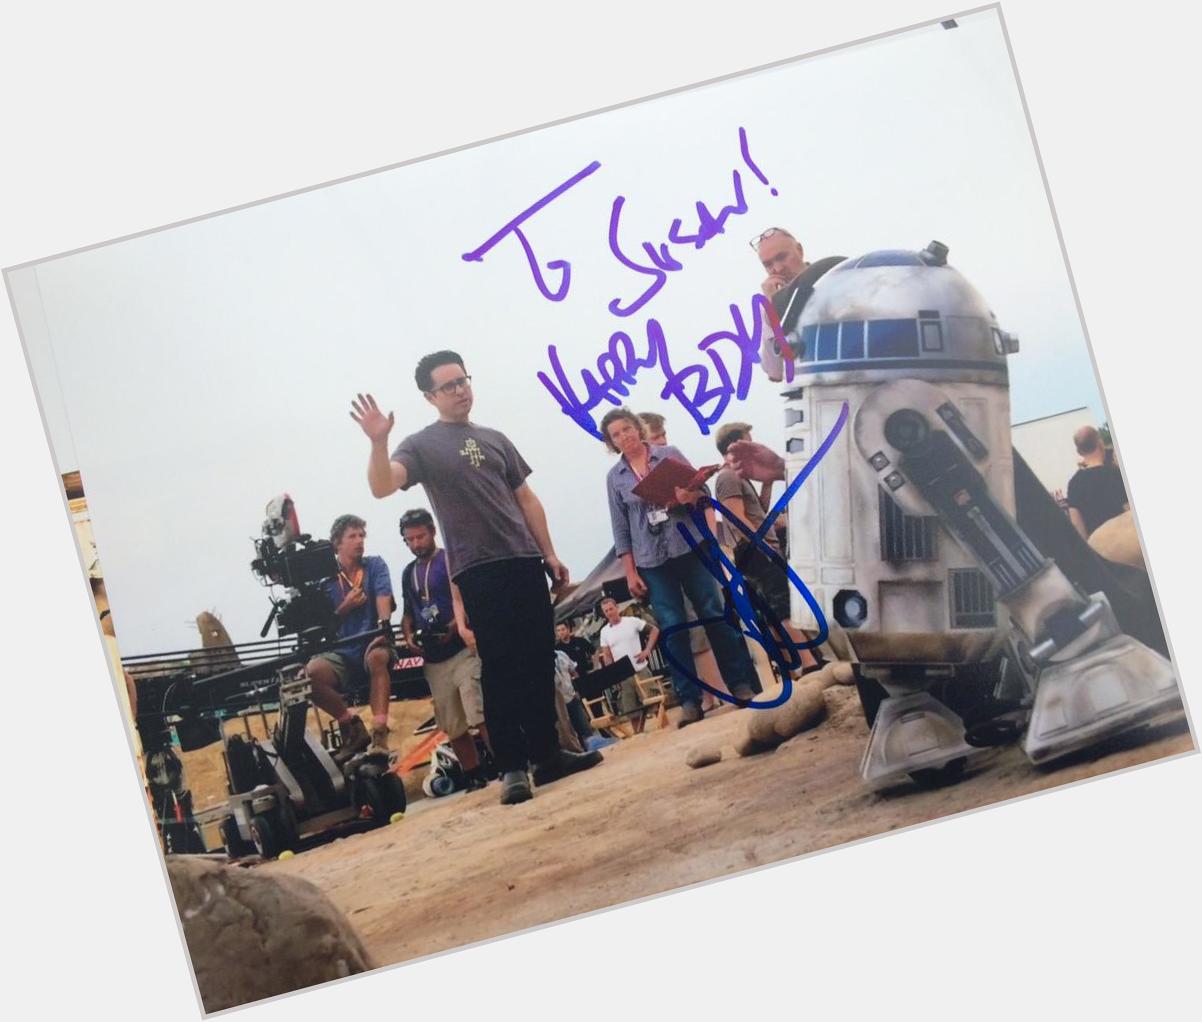  happy bday susan ! Even jj abrams wanted to say happy bday. I\ll 